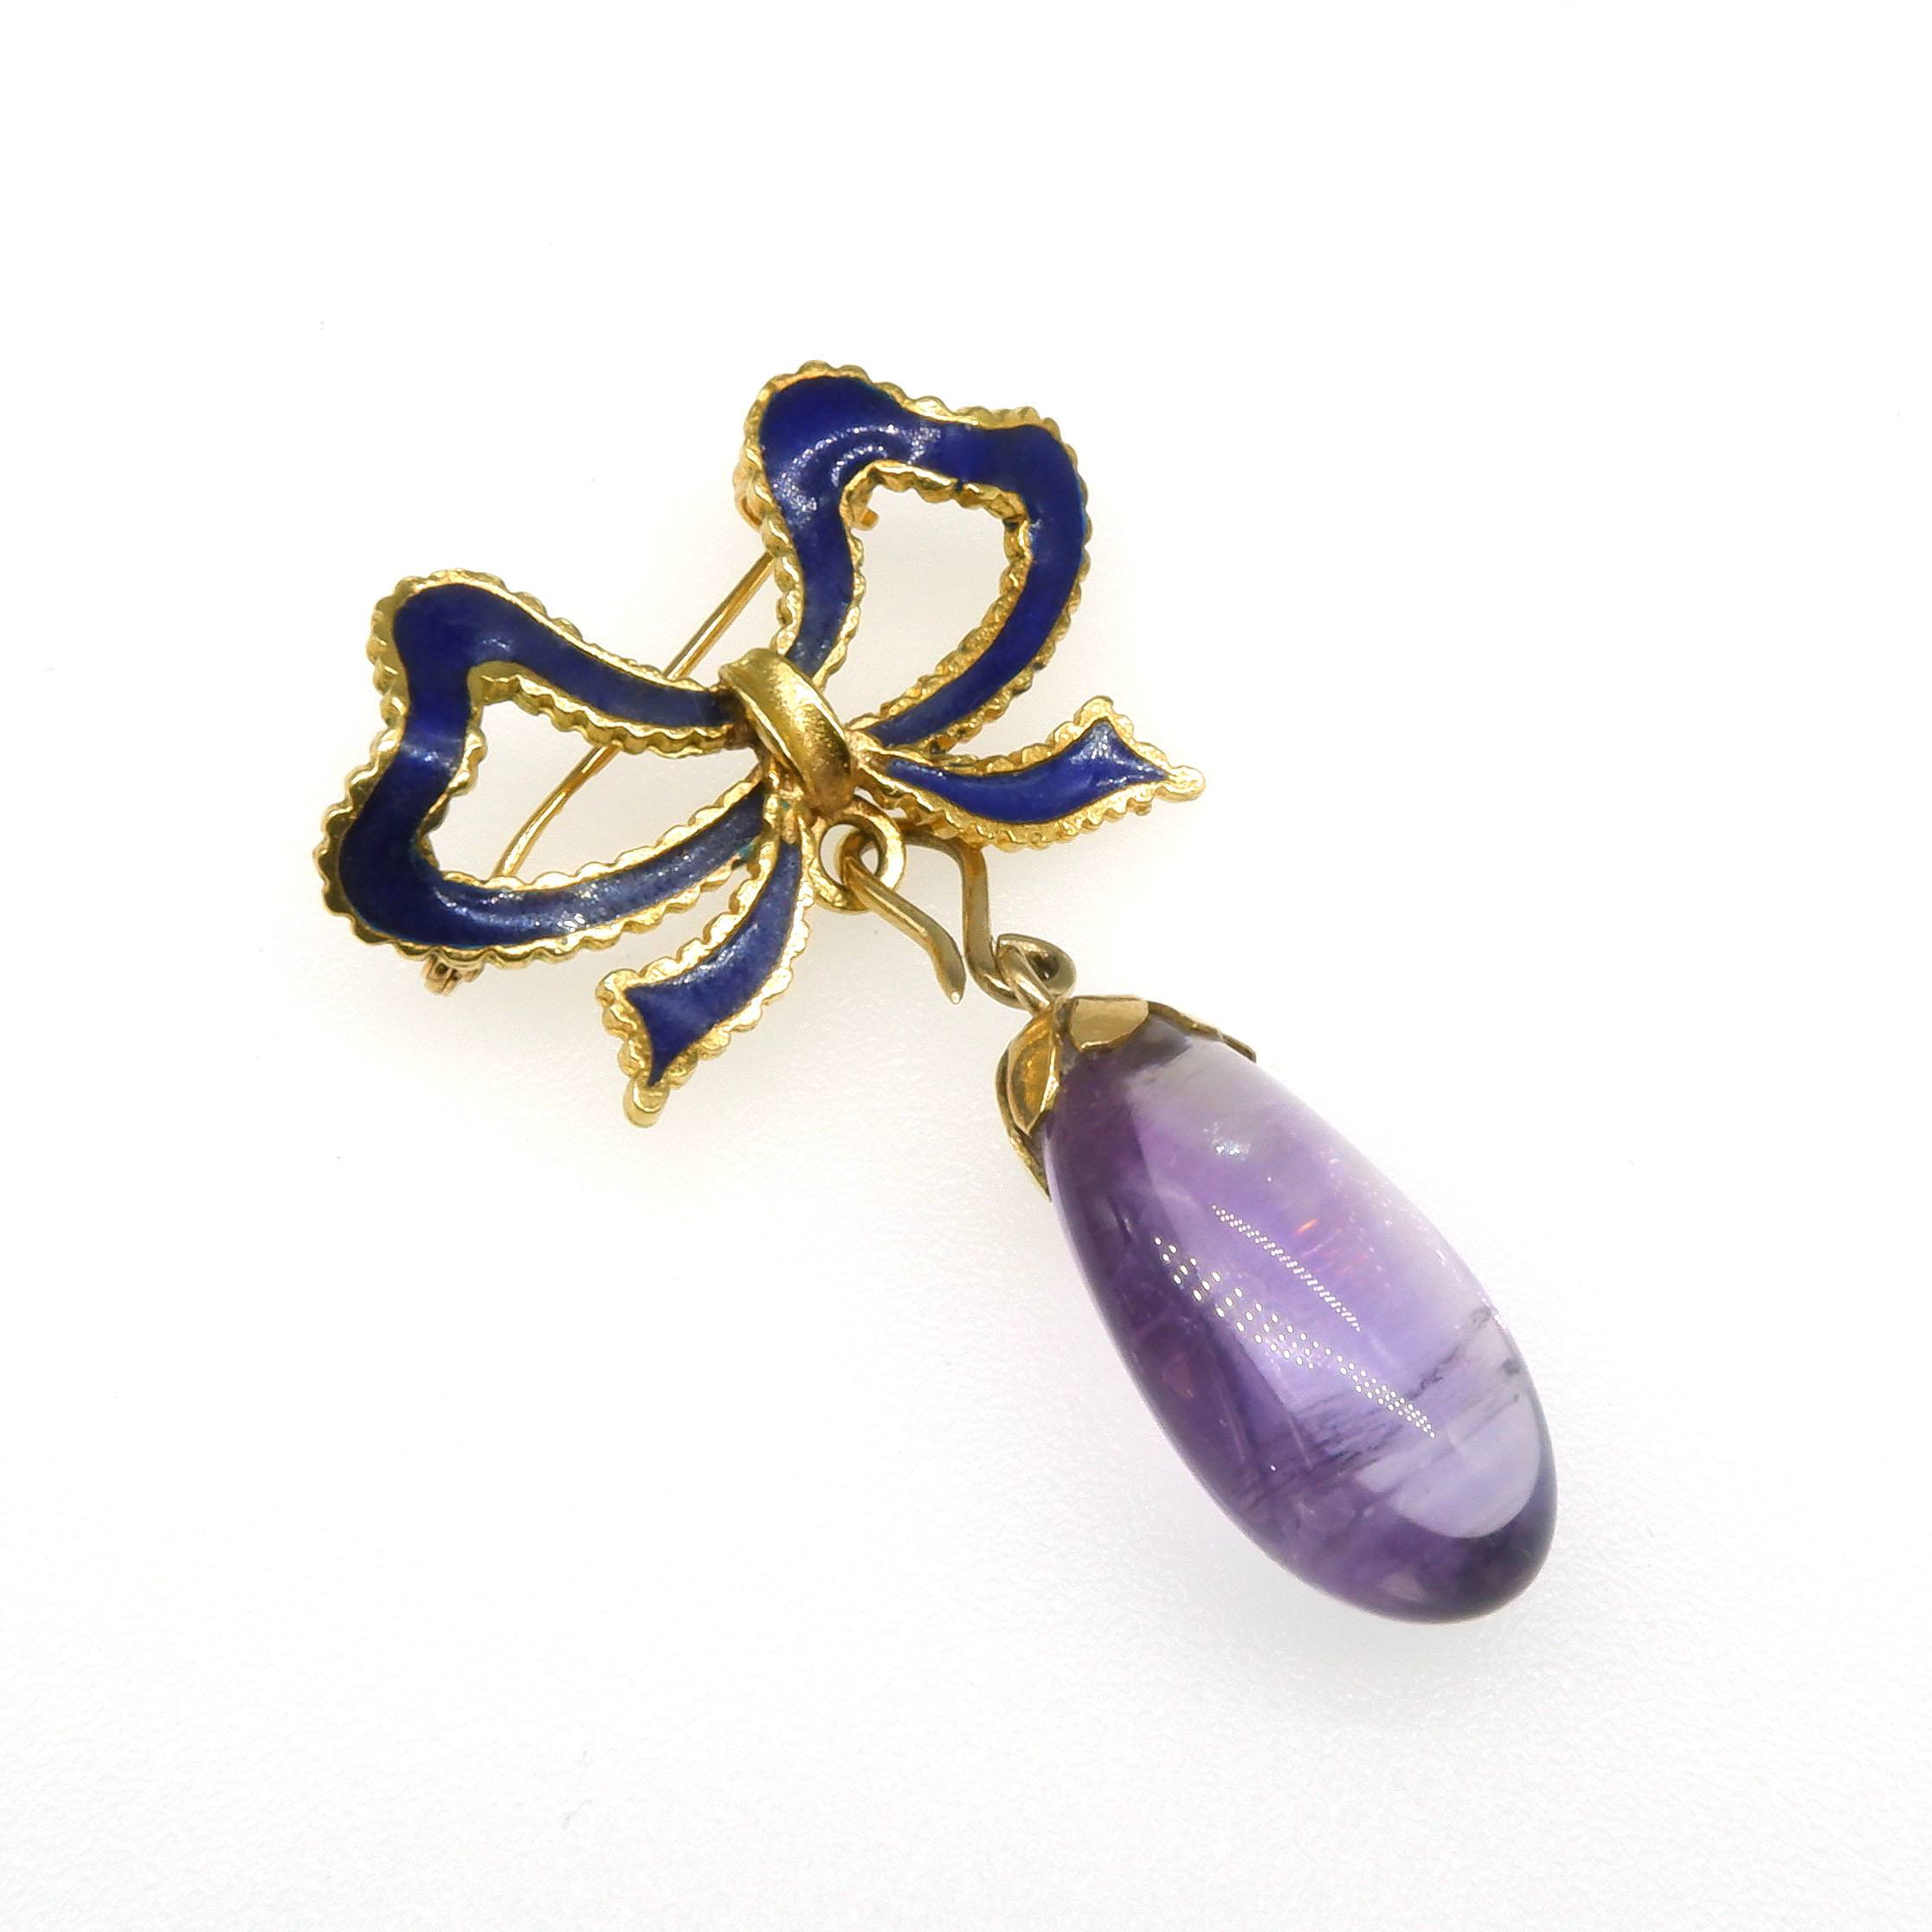 '18ct Yellow Gold Blue Enamel Bow Brooch with Dropped Freeform Amethyst Bead Pendant'